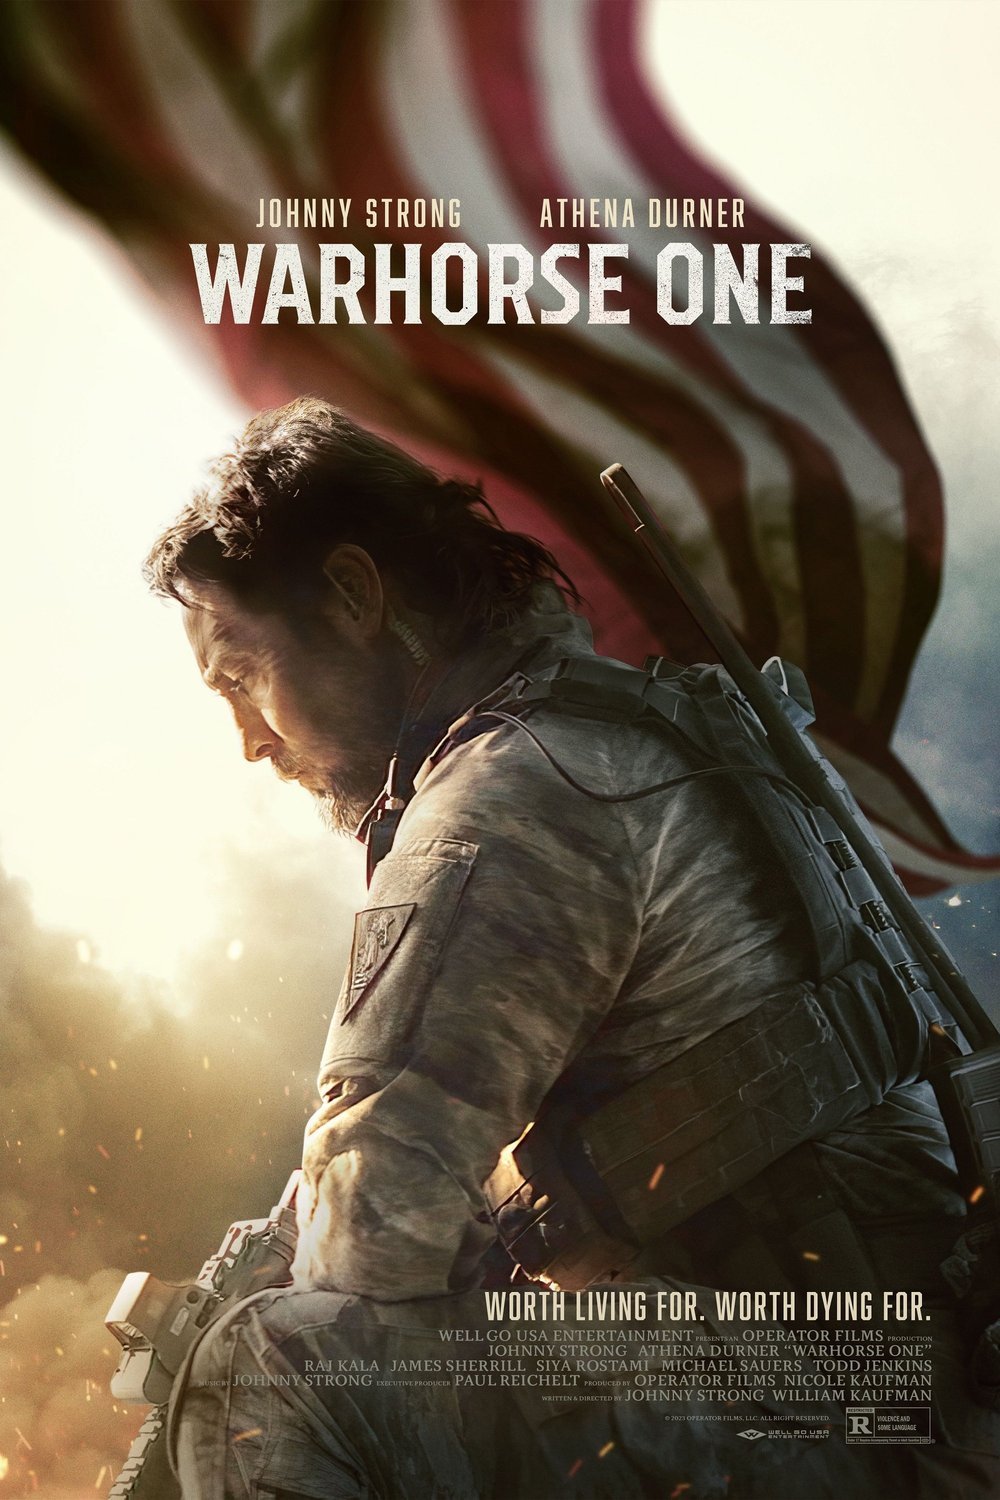 Poster of the movie Warhorse One